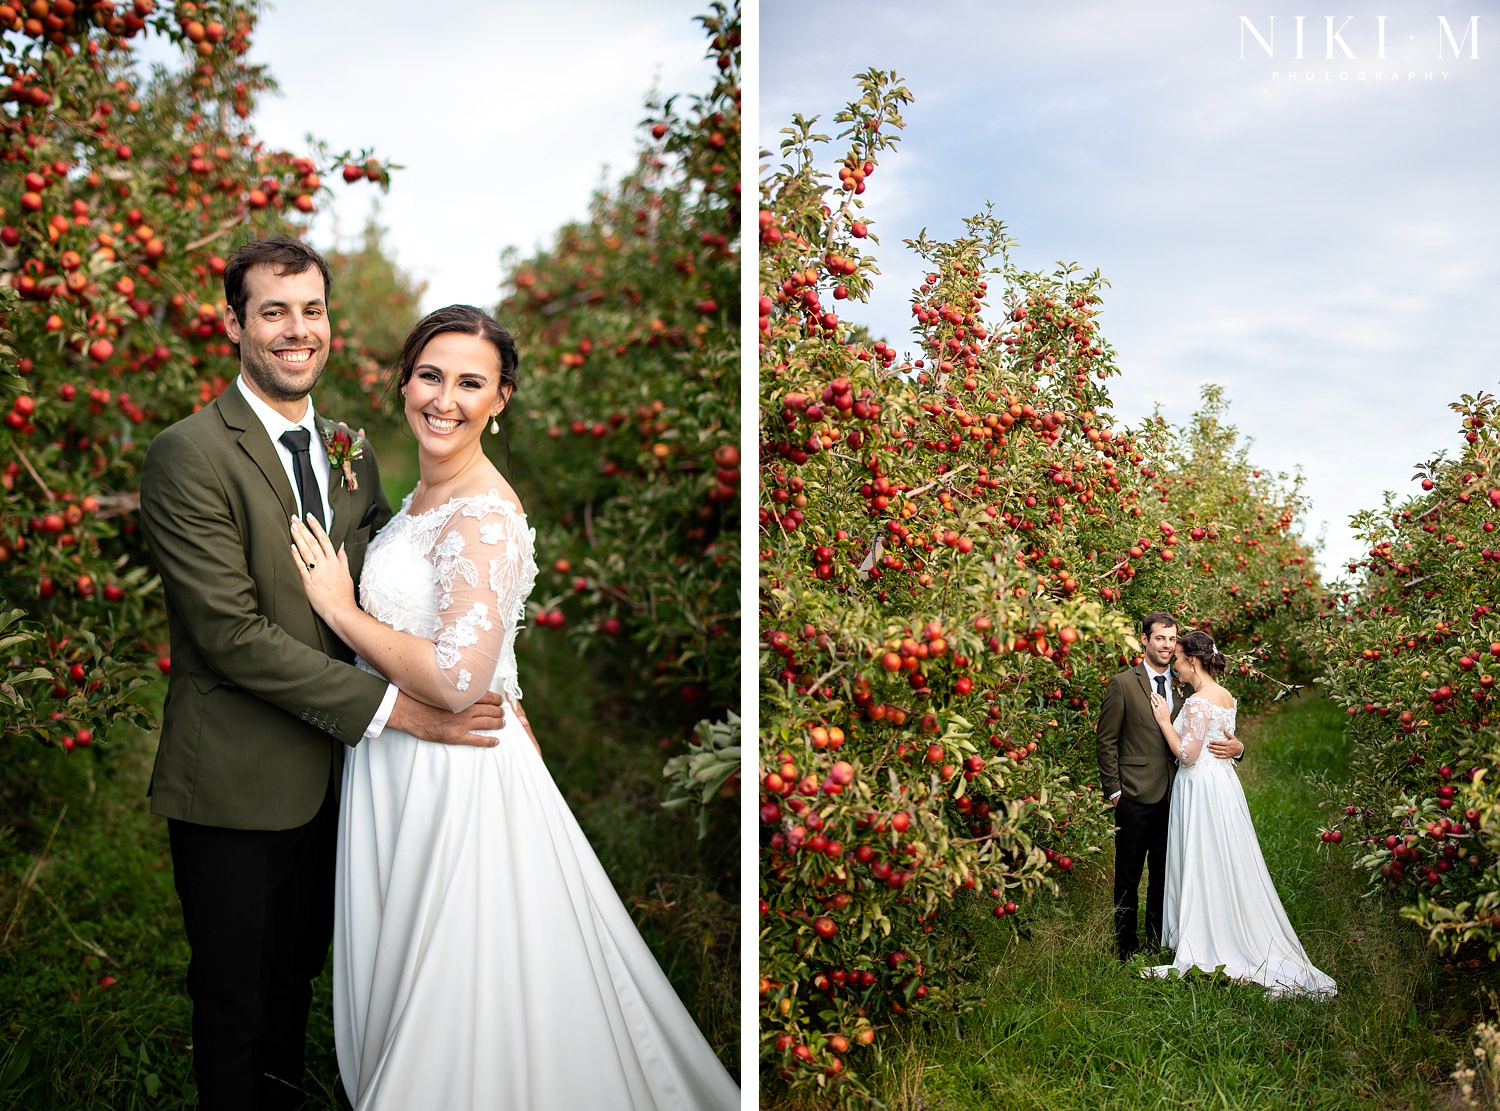 A bride and groom are surrounded by red apple trees in an apple orchard for their Elgin wedding at Cherry Glamping